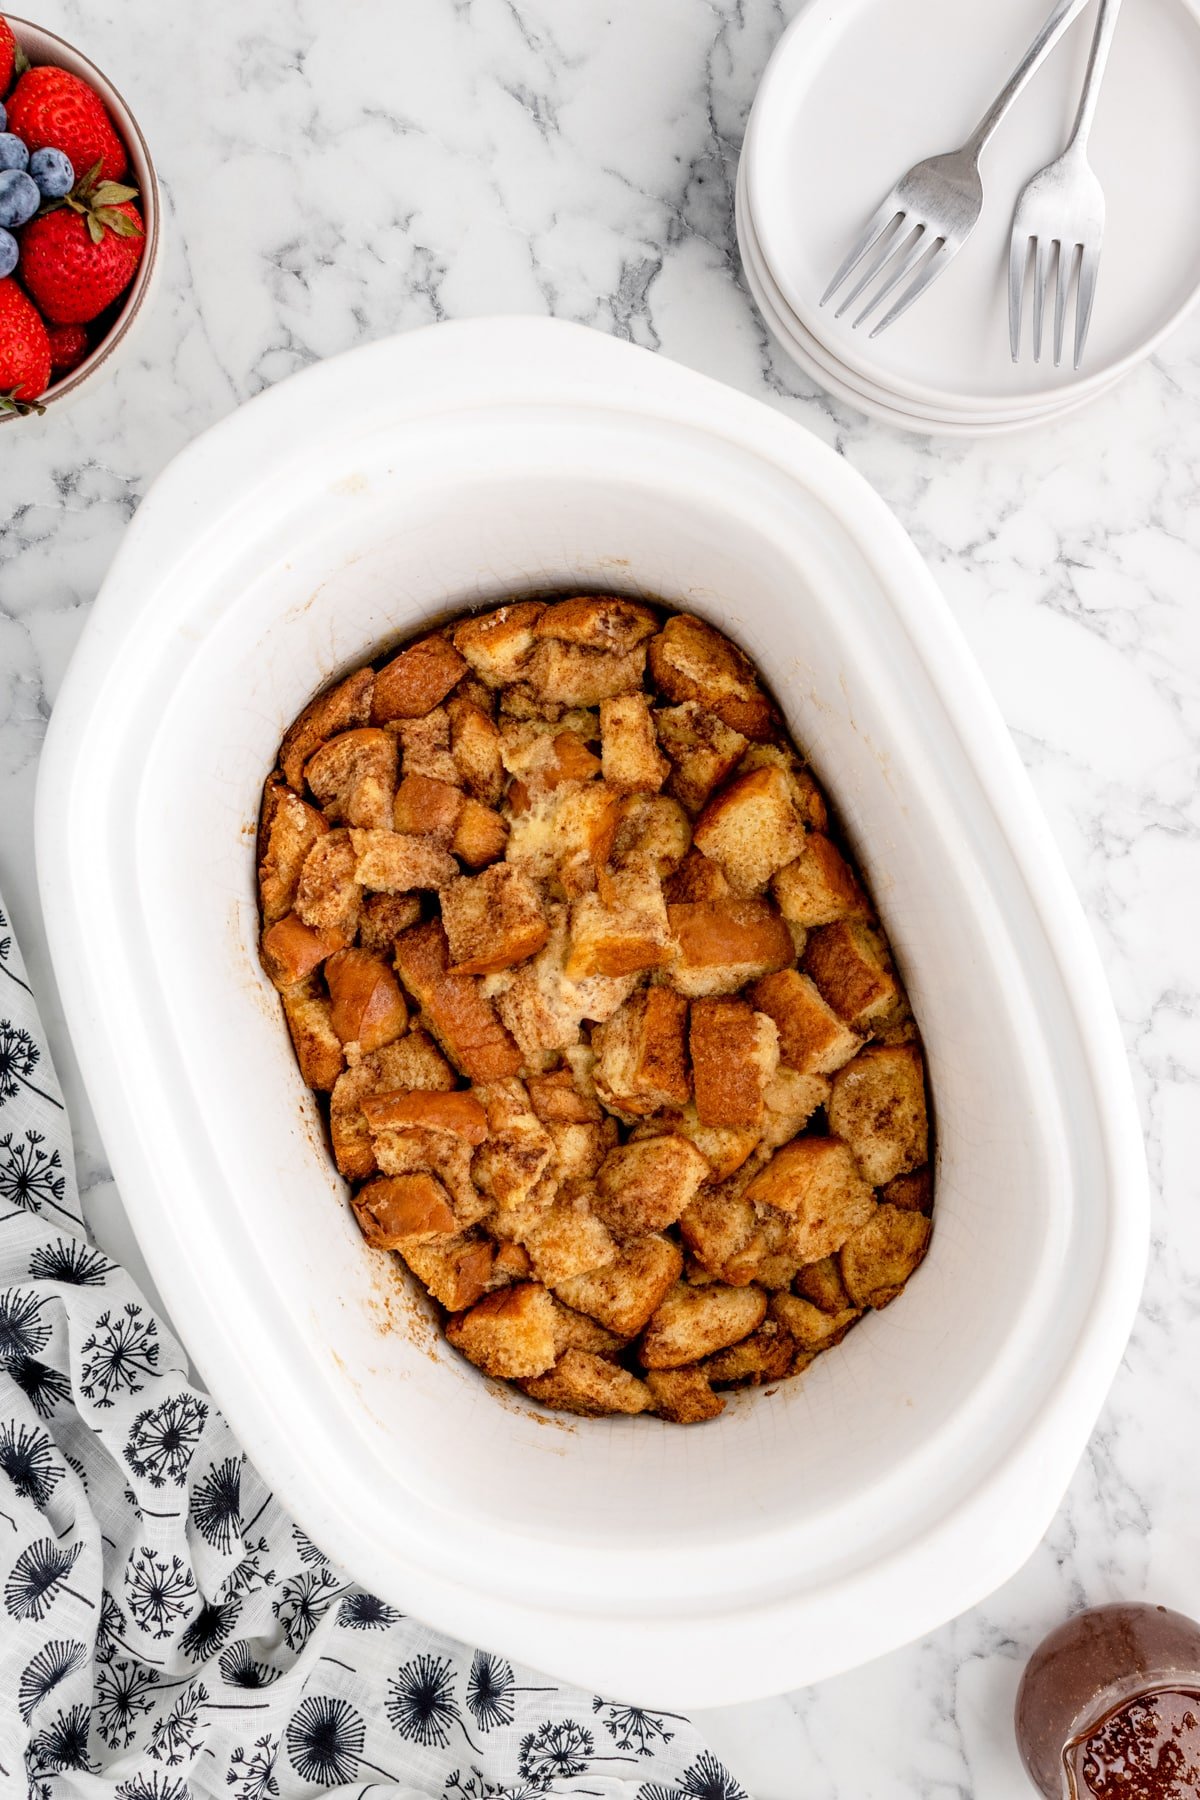 A slow cooker with baked French toast in it.